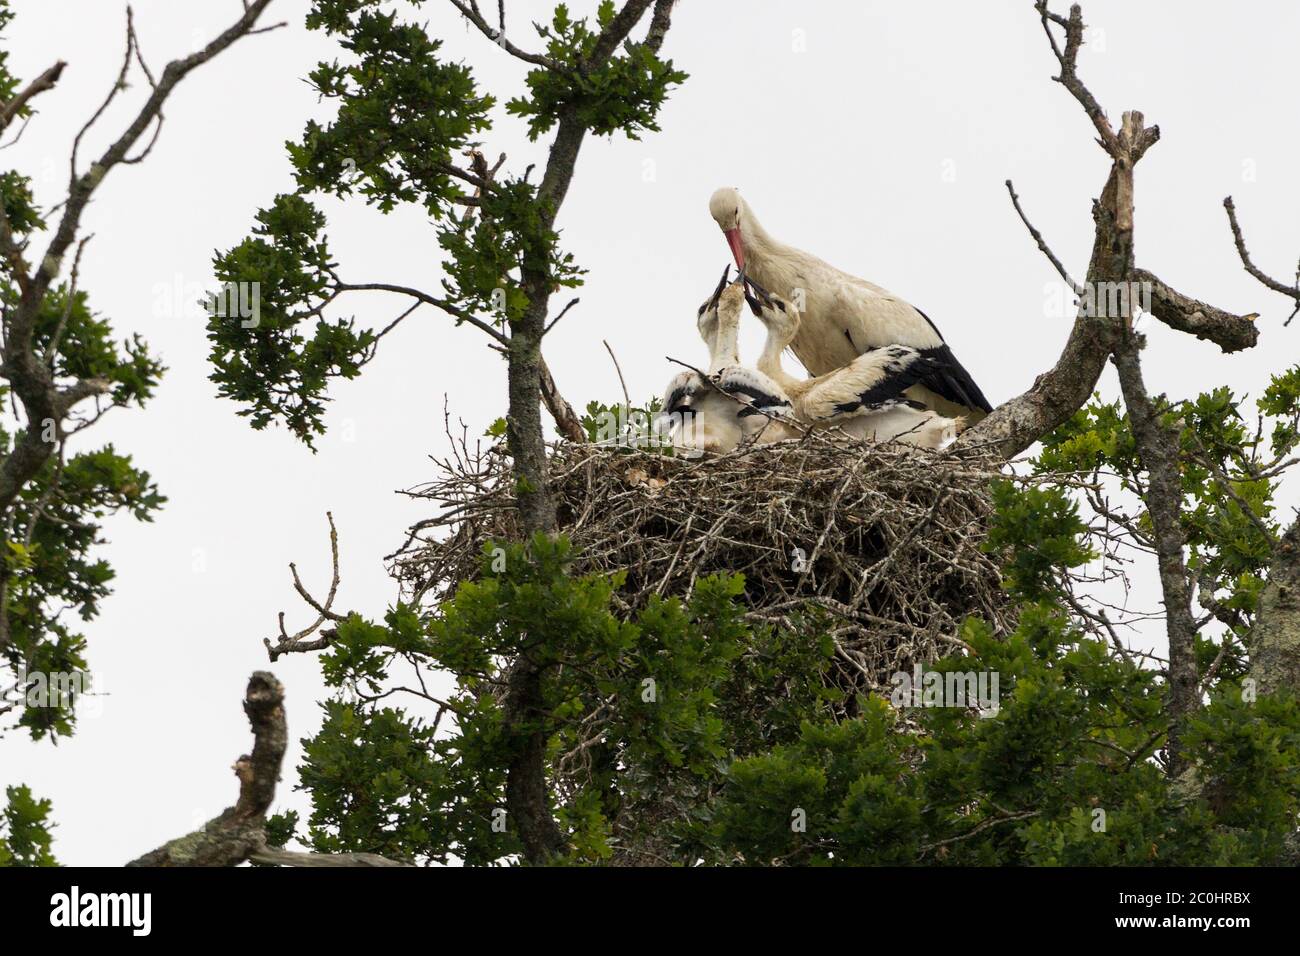 White storks breeding in UK white with black on wings long sharp orange bill on adult bird. Three chicks in nest parents swapping over to hunt Stock Photo